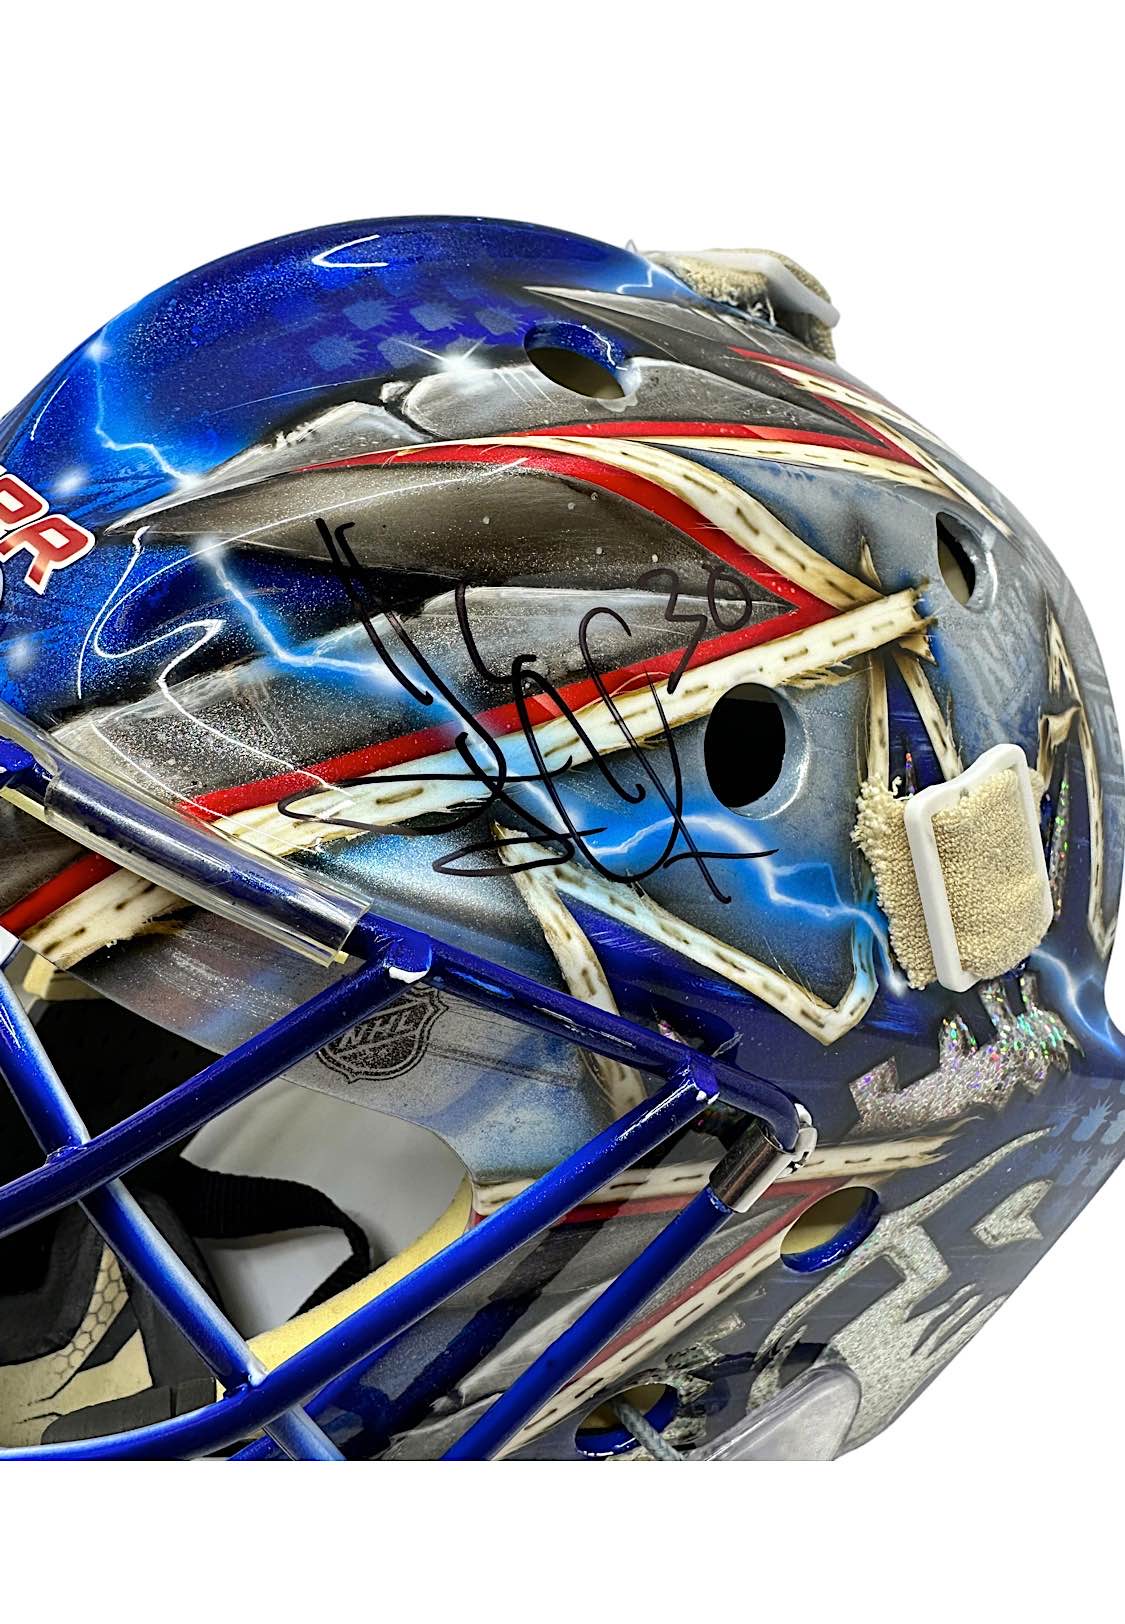 Henrik Lundqvist New York Rangers Autographed Replica Goalie Mask with Multiple Inscriptions - Limited Edition of 30